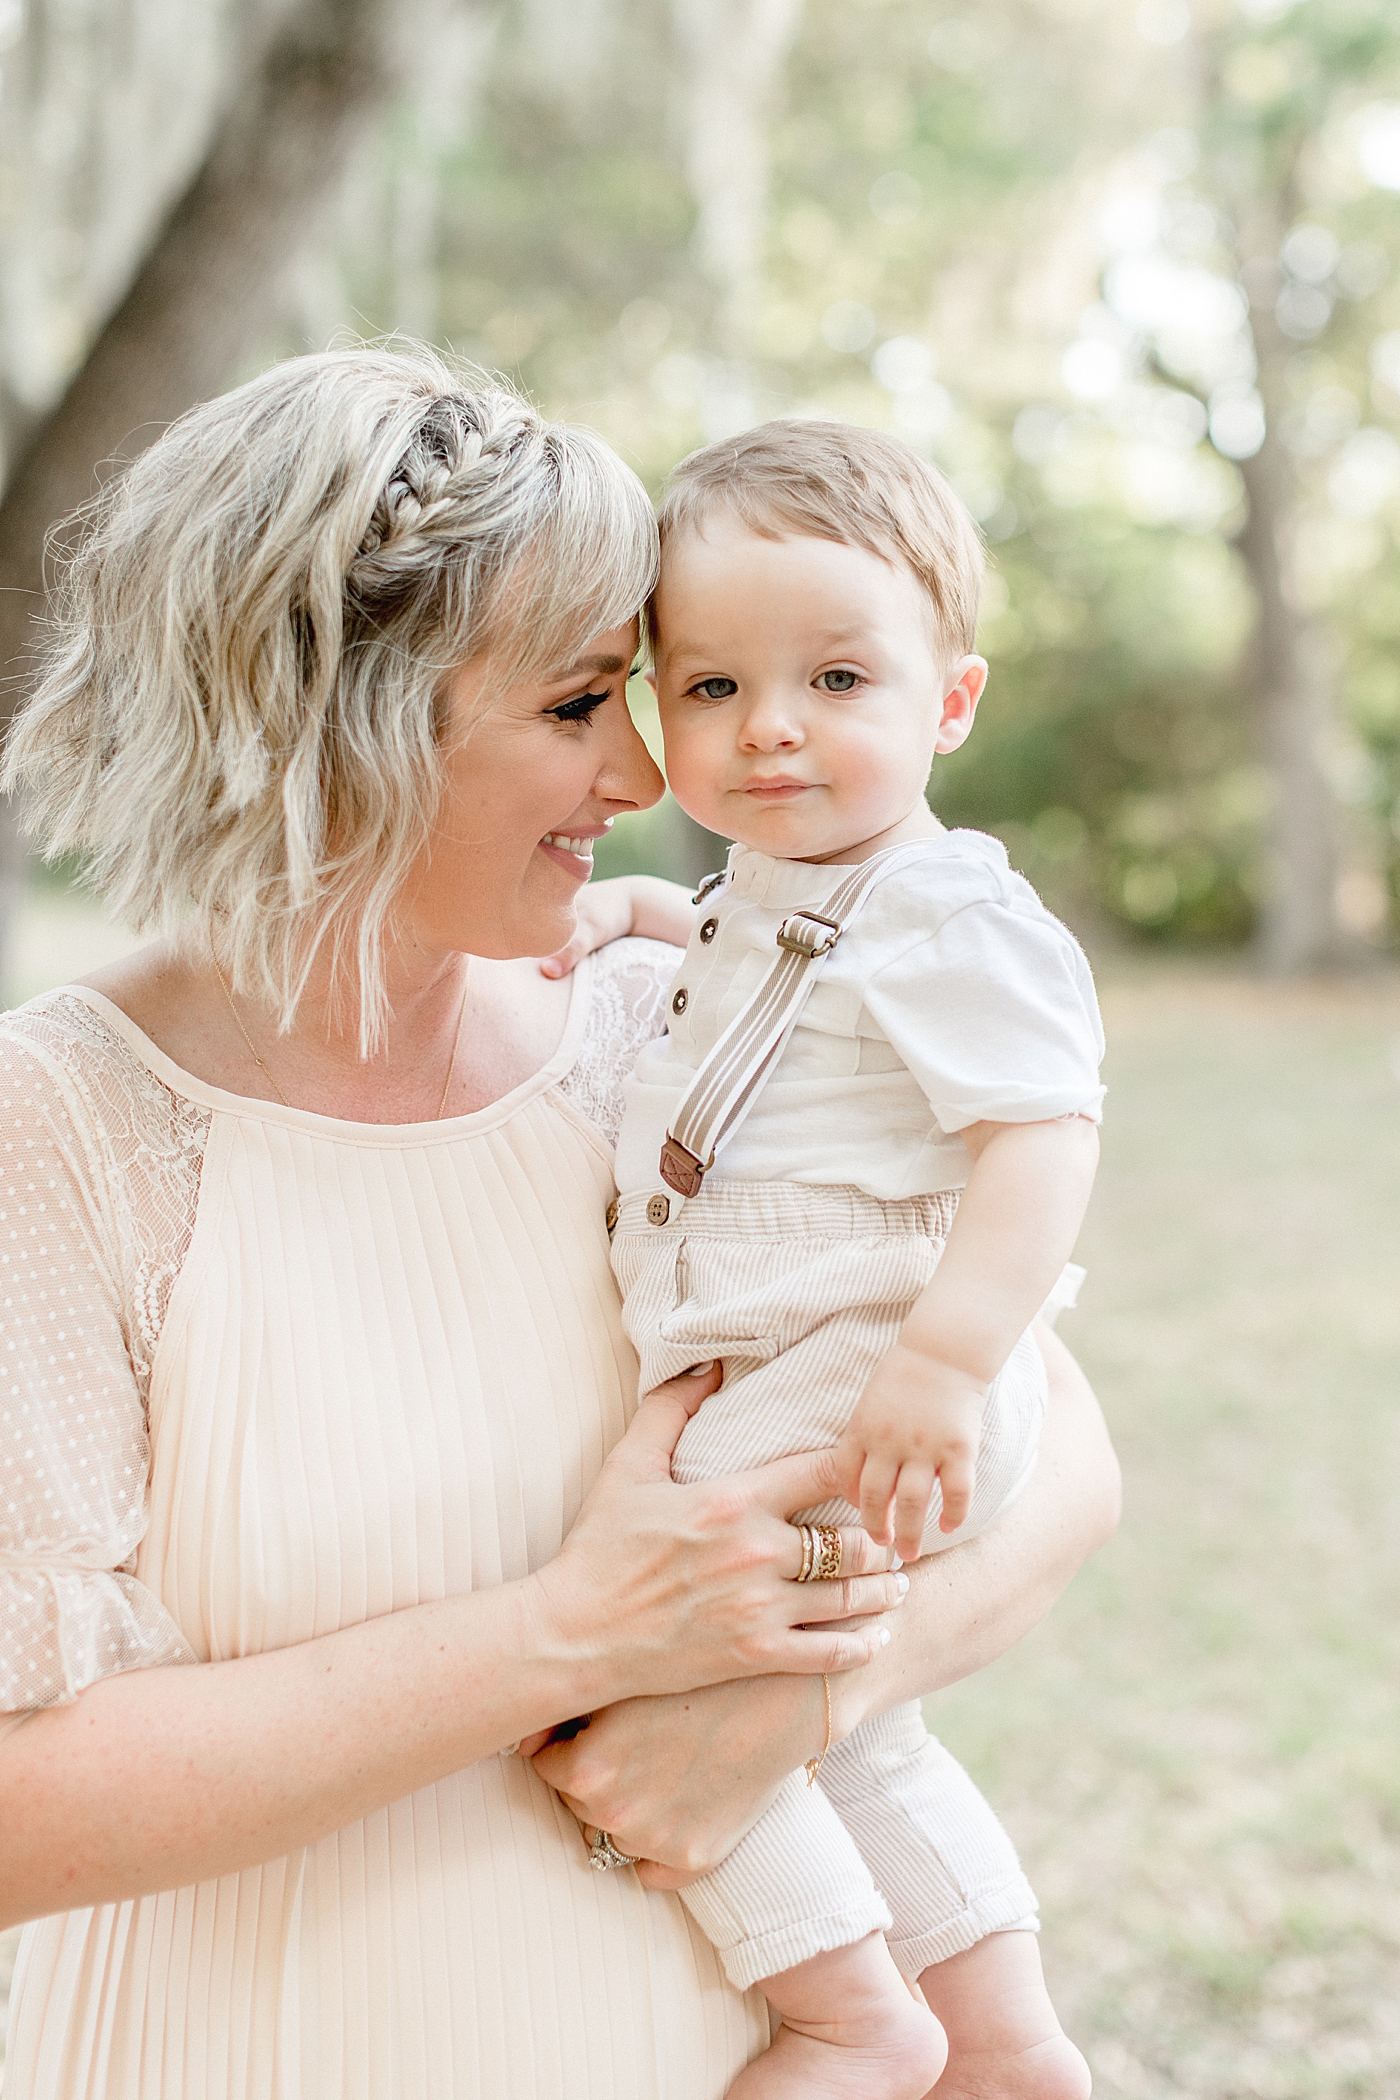 Mom holding her one year old son for his first birthday photoshoot. Photo by Brittany Elise Photography.